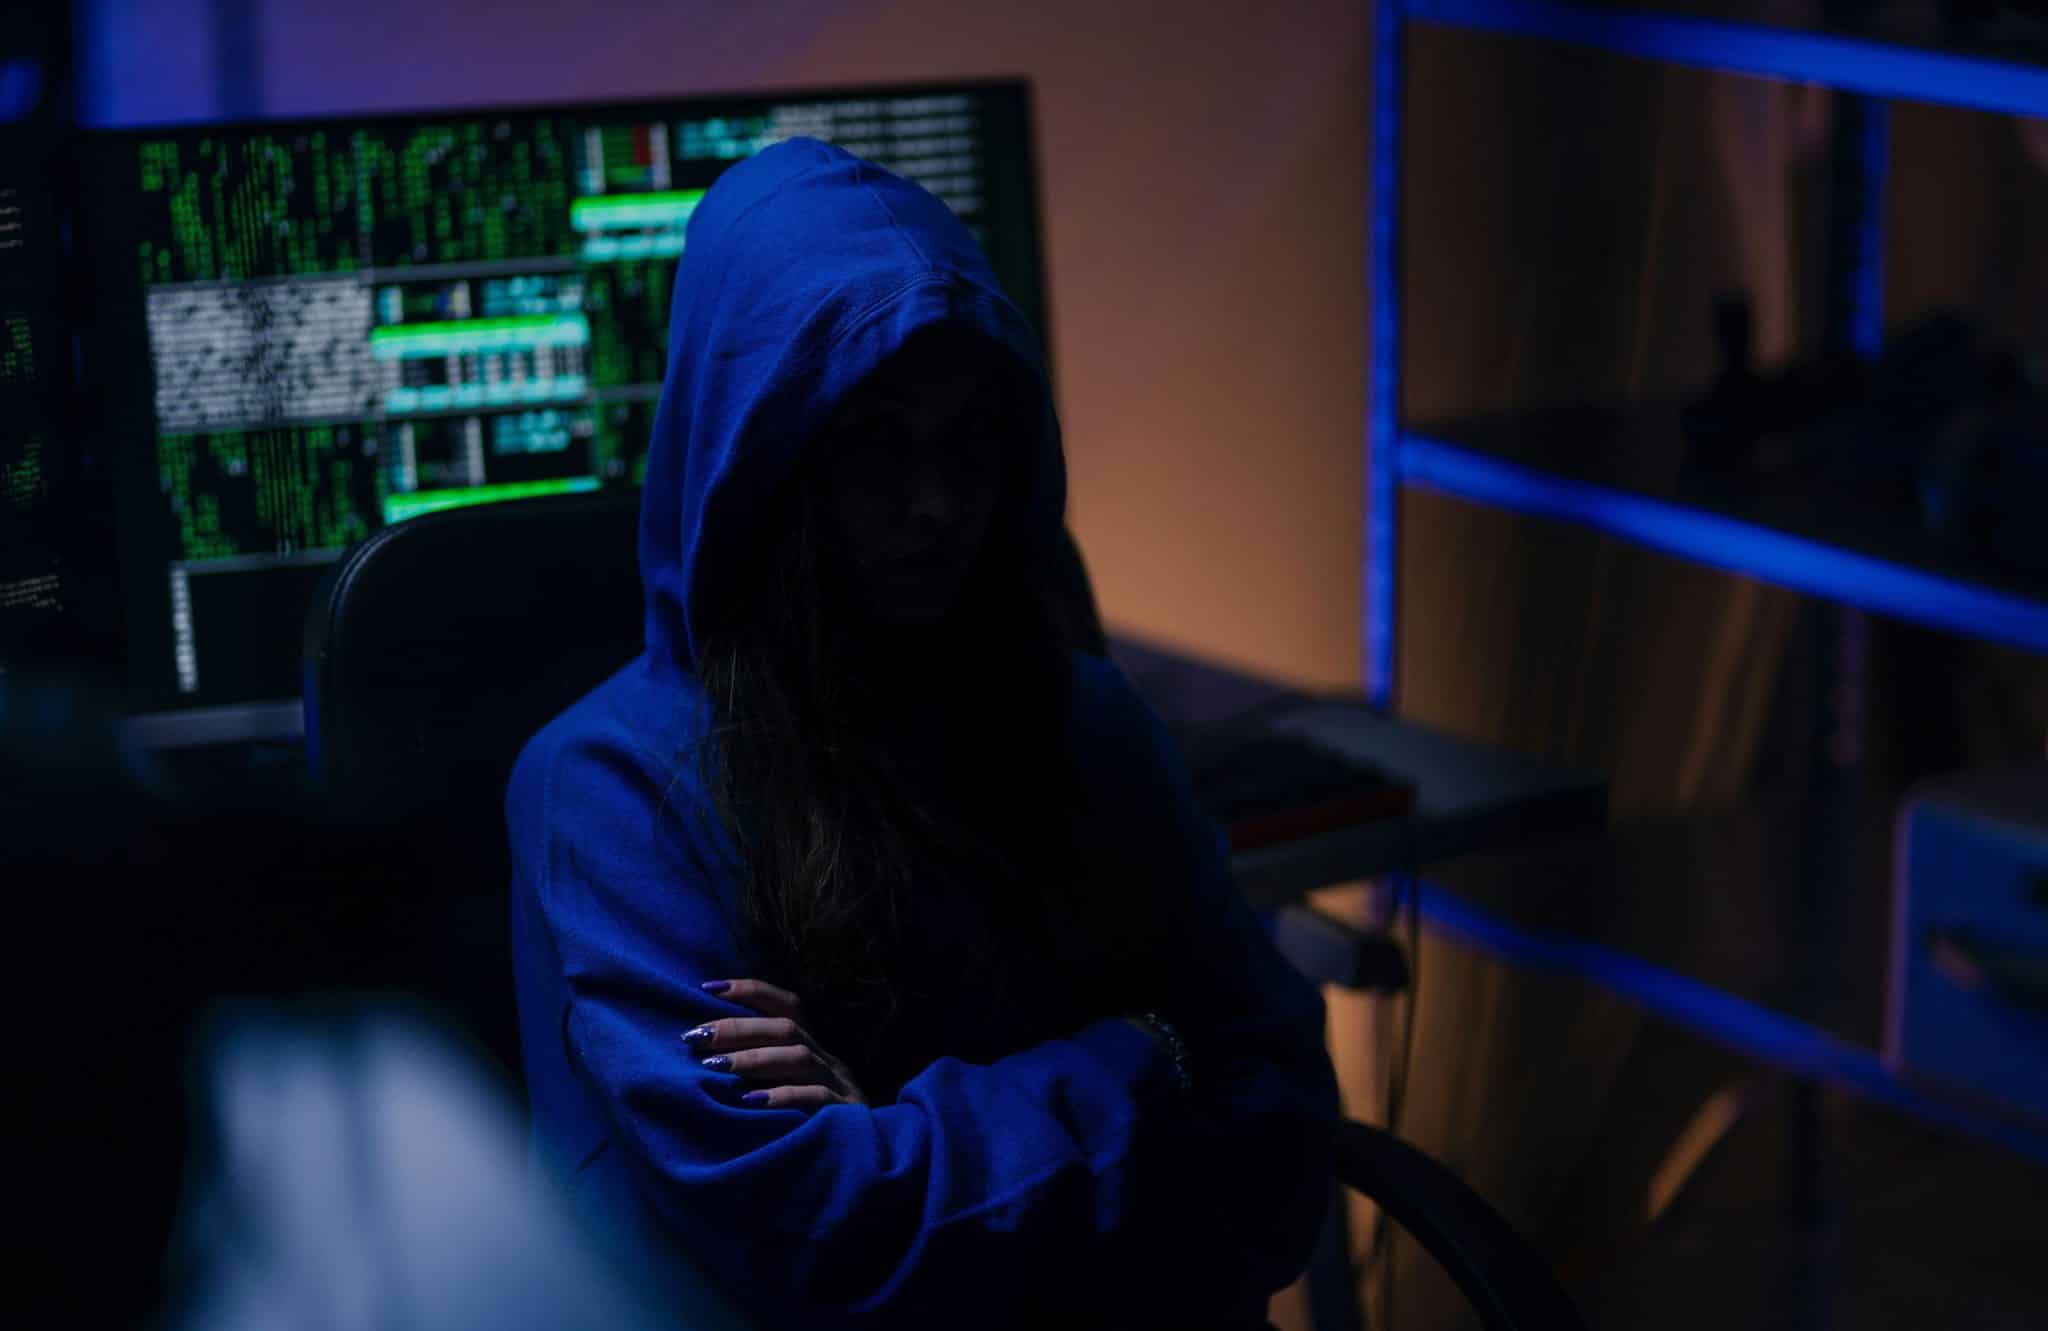 Vietnam crypto cyber crime gang pull off huge $71M crypto heist - but how much stolen Bitcoin has hit the market? Here's the low down.